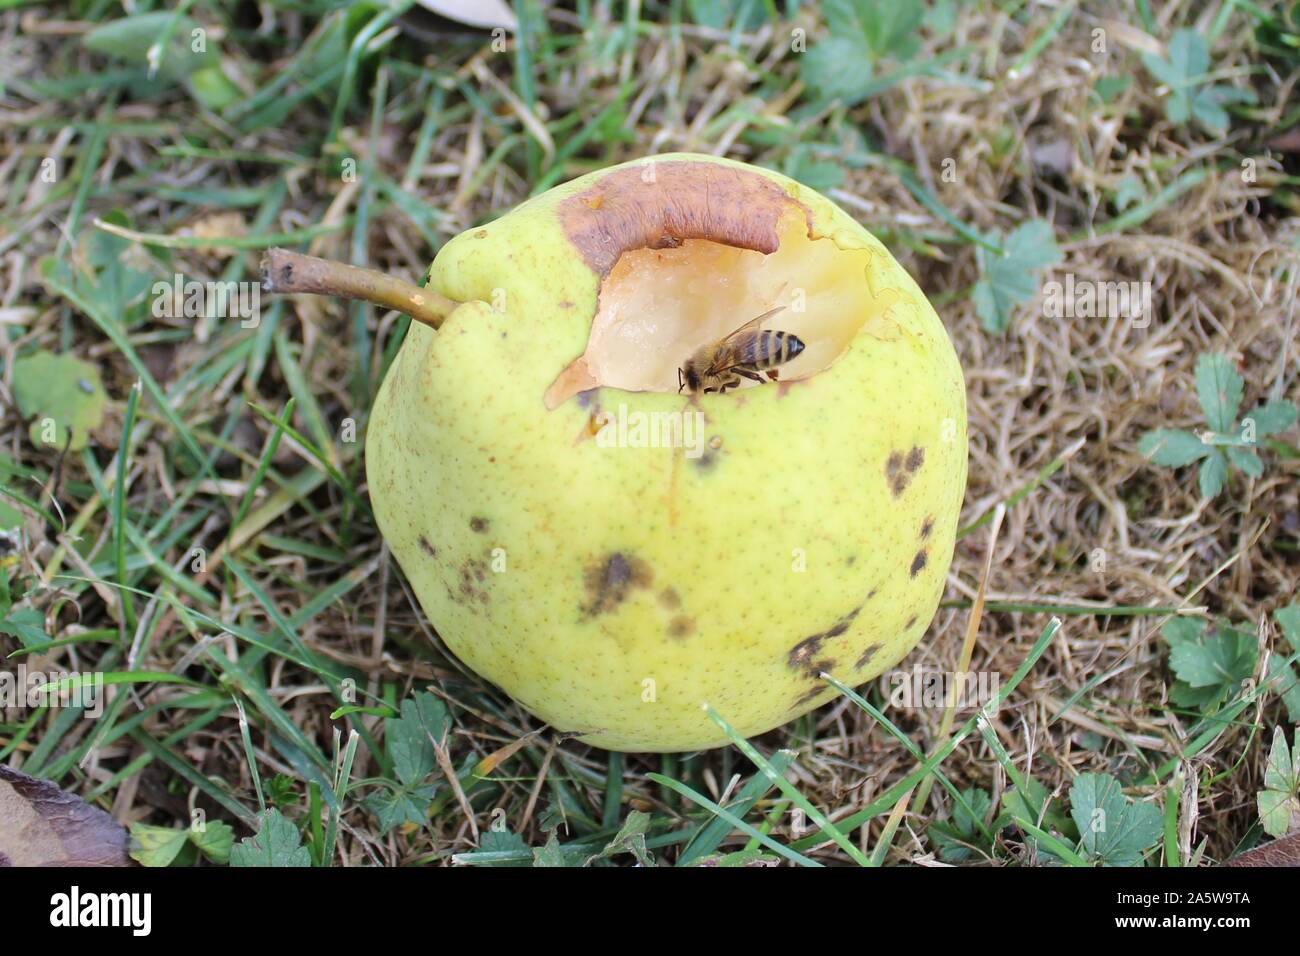 The picture shows a bee on a pear. Stock Photo